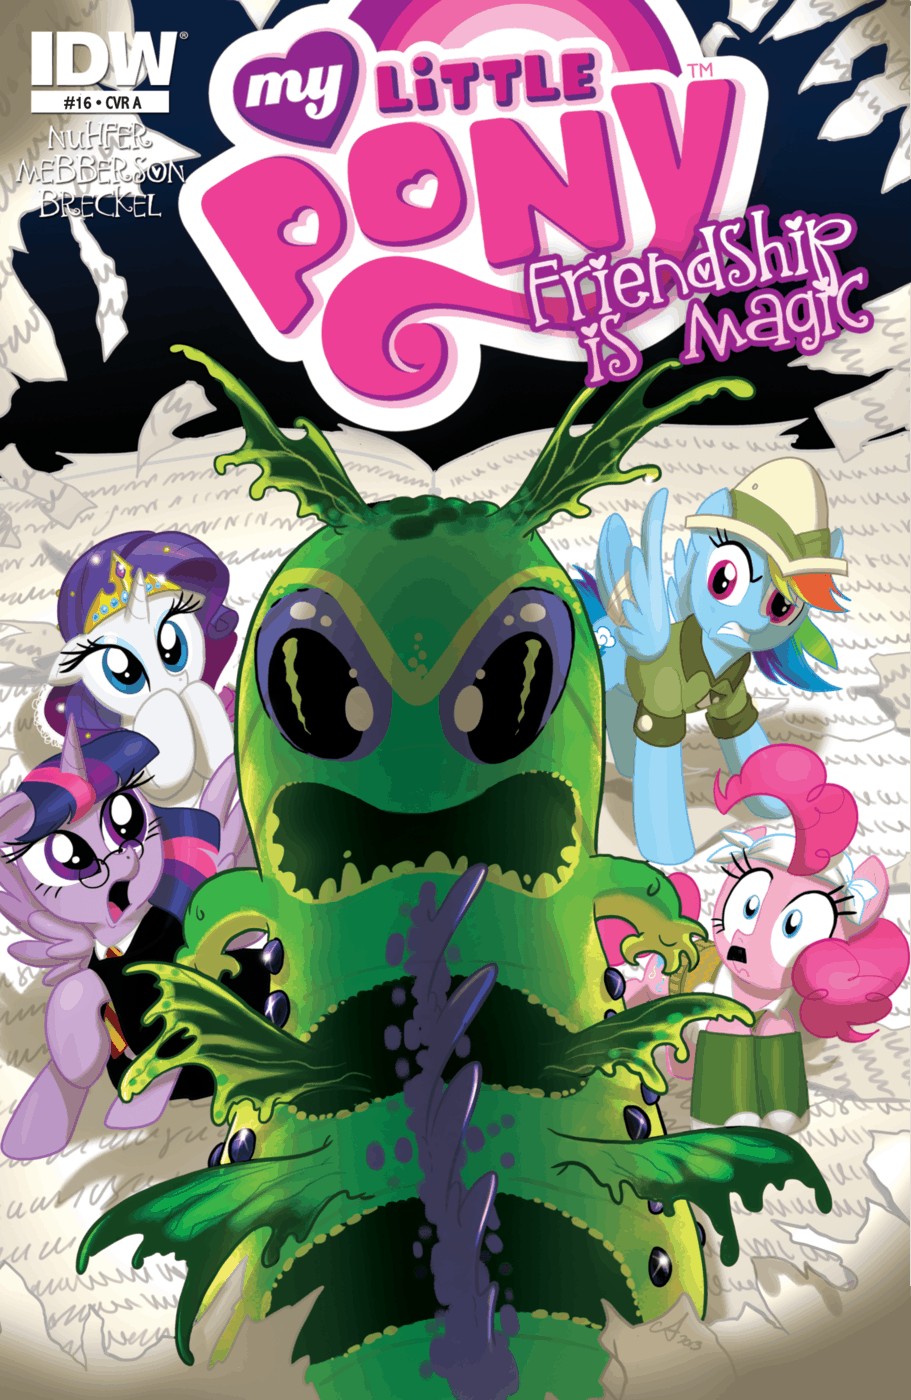 Read online My Little Pony: Friendship is Magic comic -  Issue #16 - 1